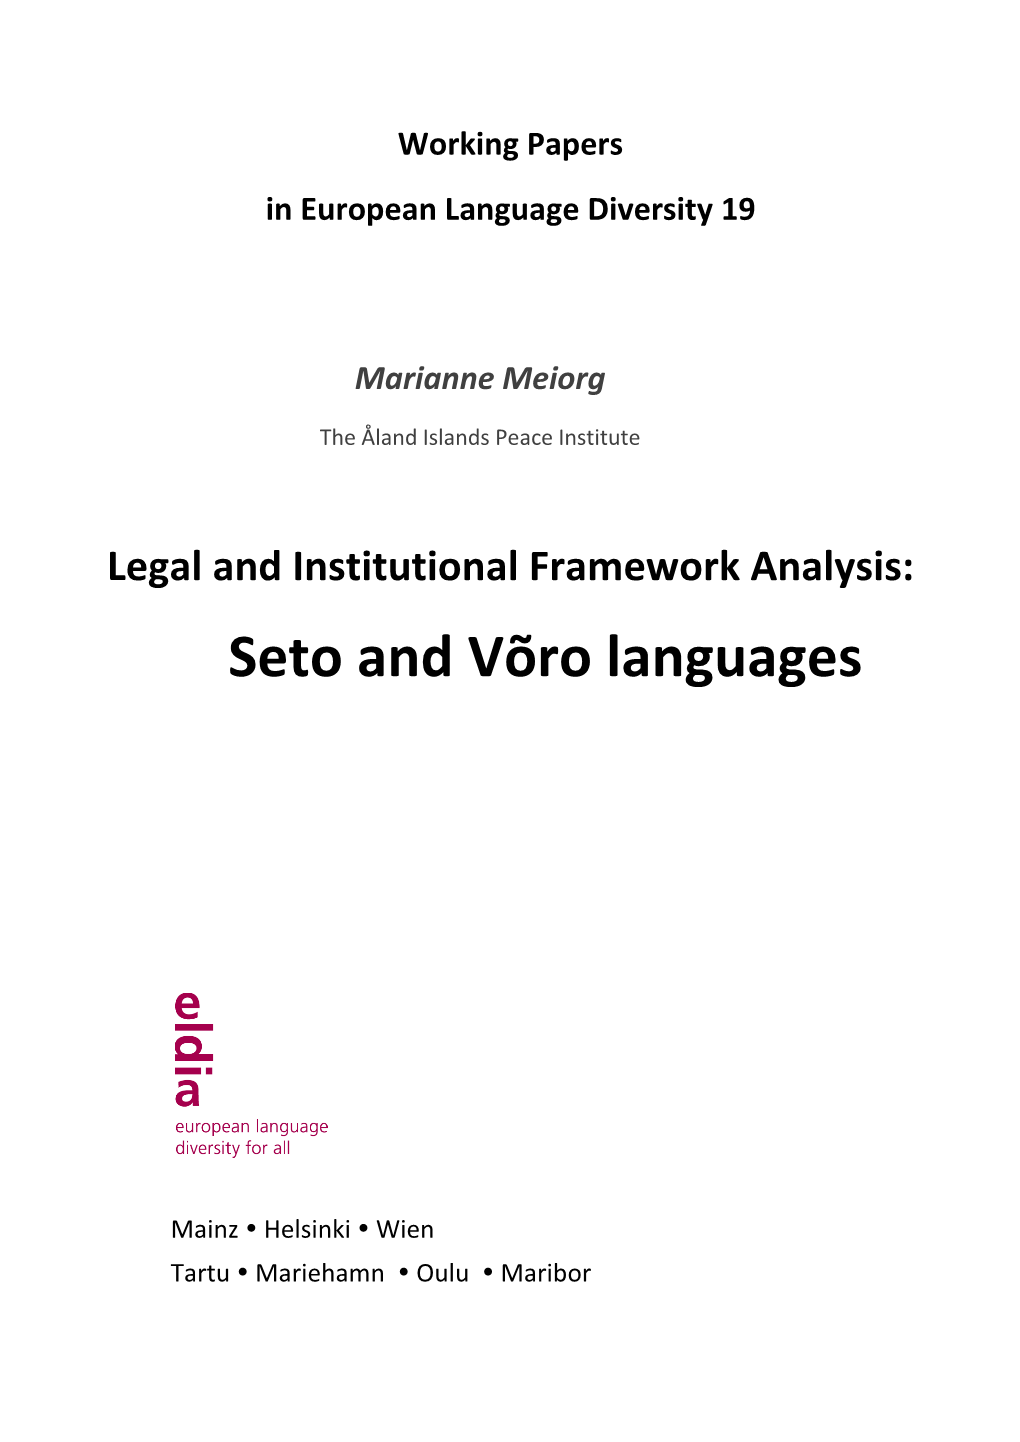 Legal and Institutional Framework Analysis: Seto and Võro Languages